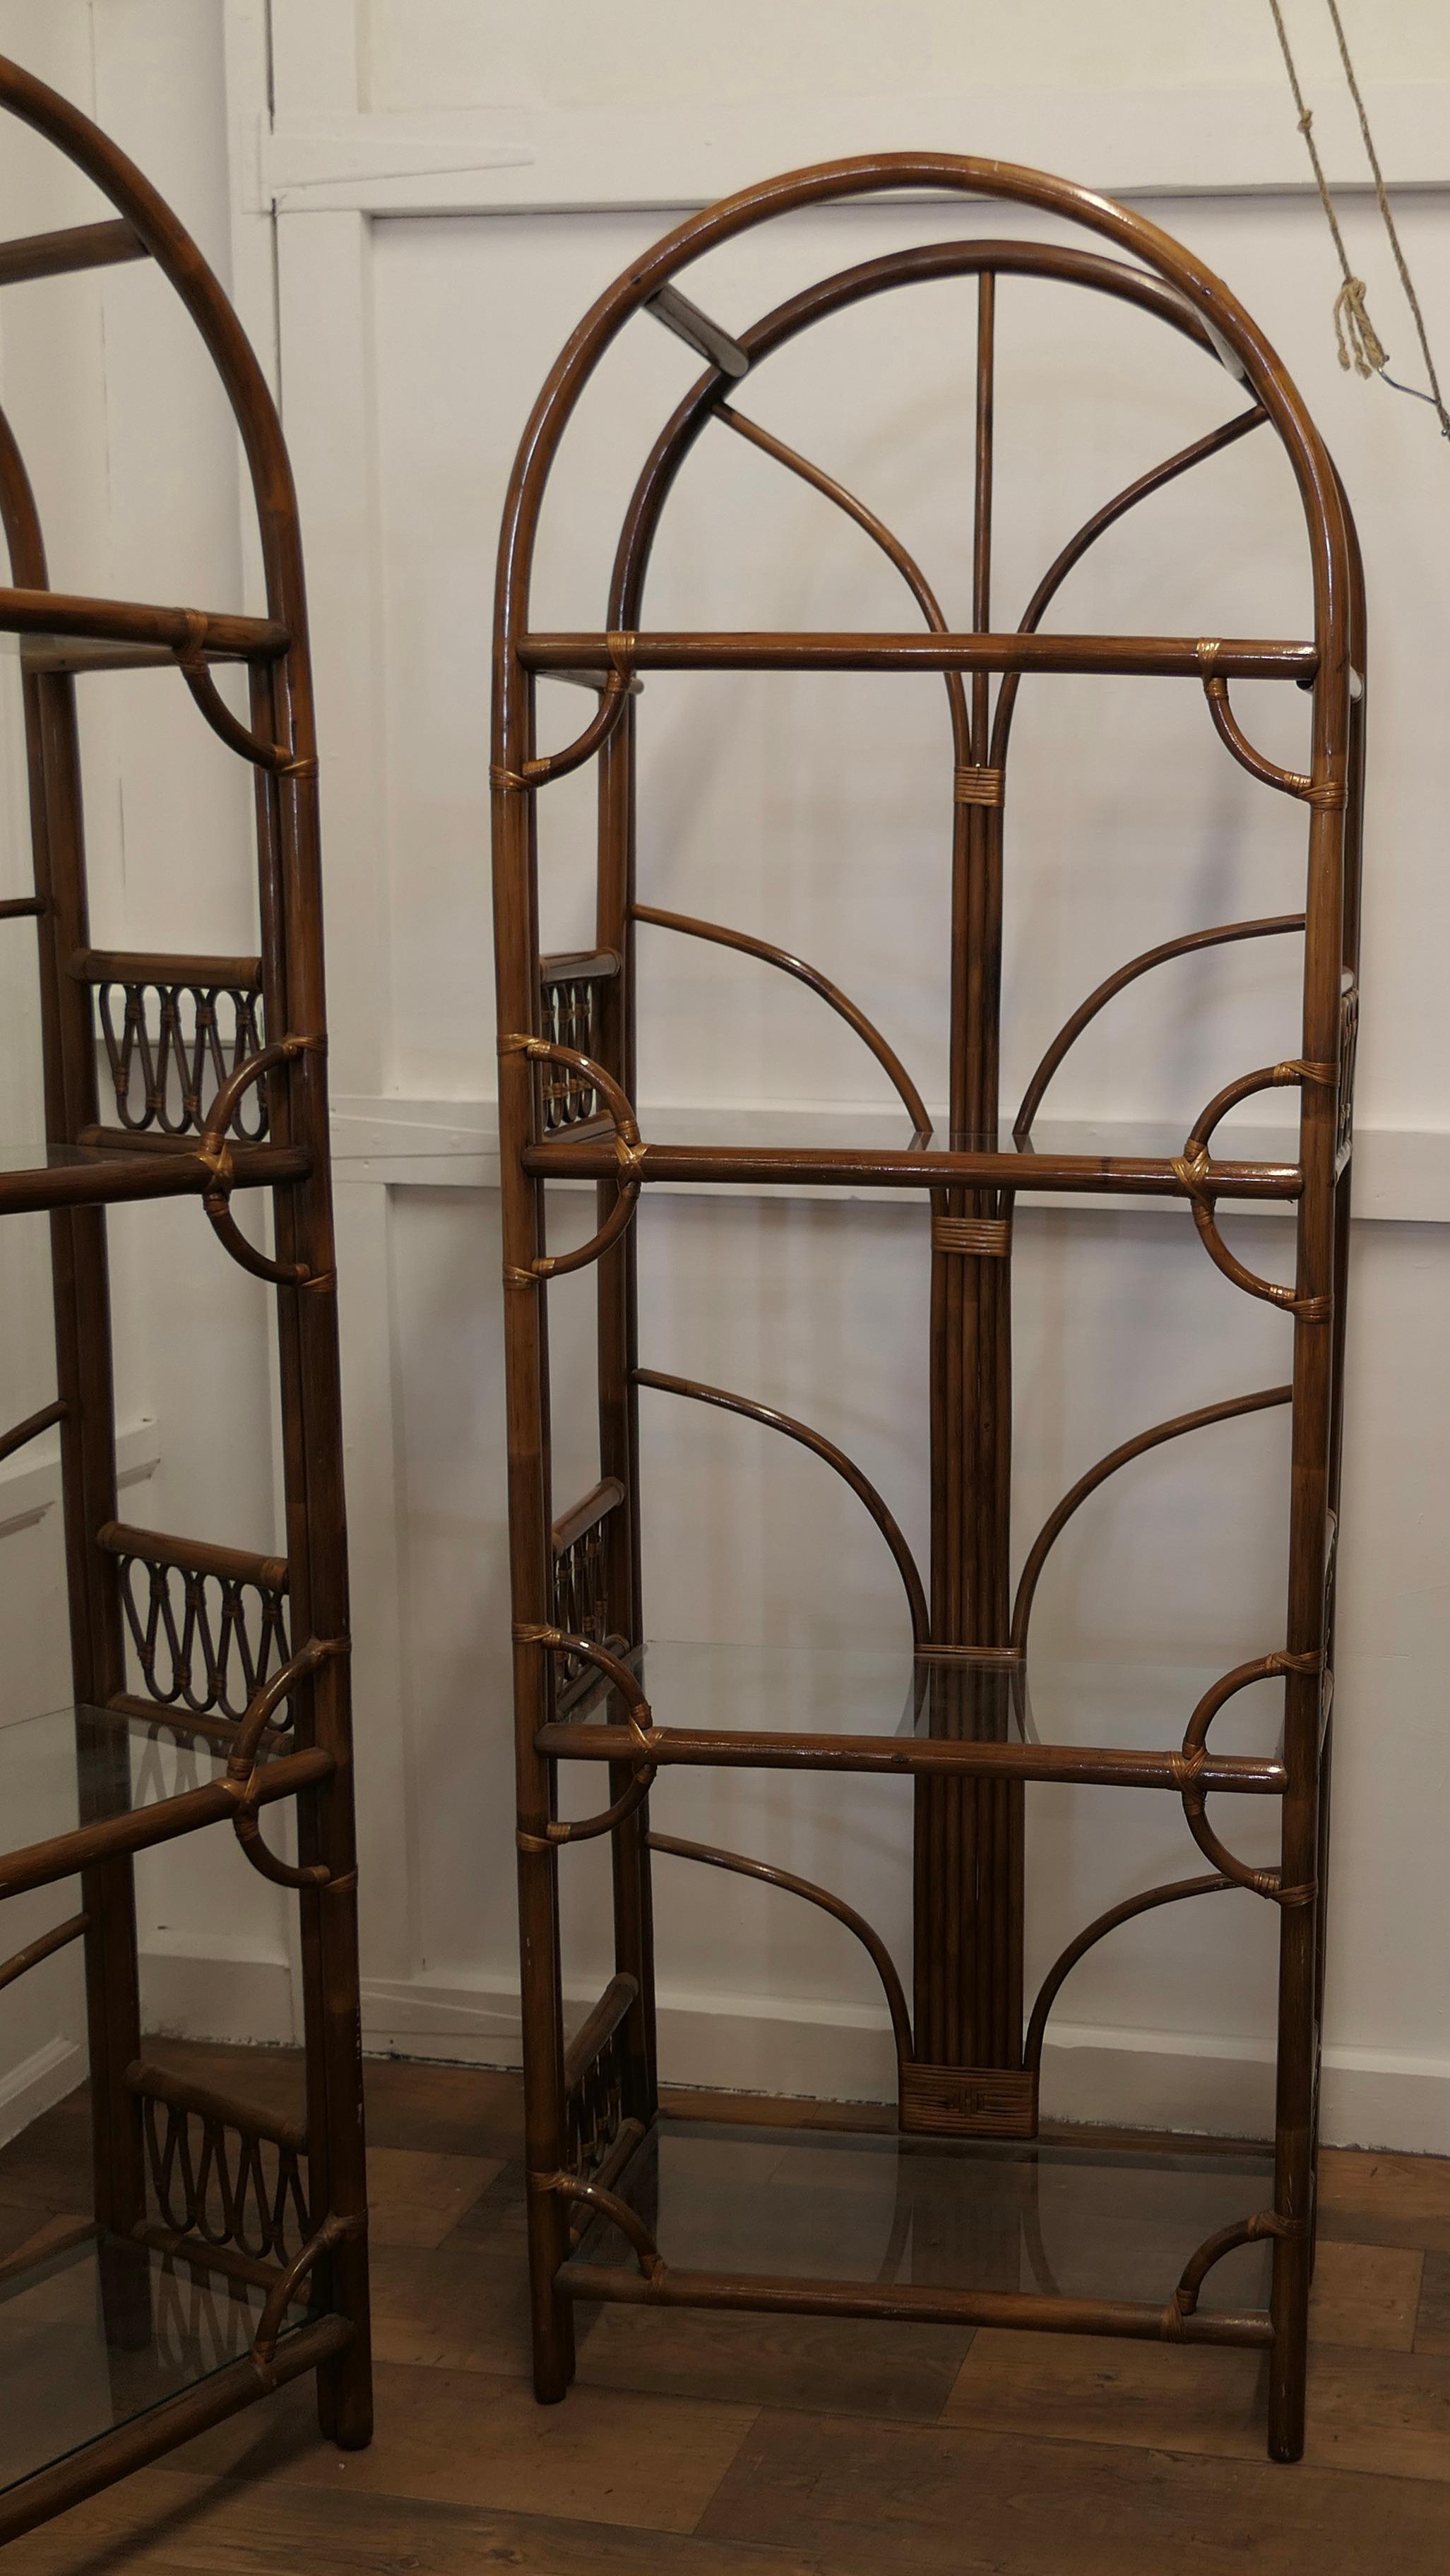 A Pair of Tall Bamboo and Glass Bookcases, Room Dividers 

These are a pair of midcentury Age Darkened Bamboo Bookshelves, beautifully and sturdily designed with arched tops and 4 long glass shelves each
The shelves are free standing and in good